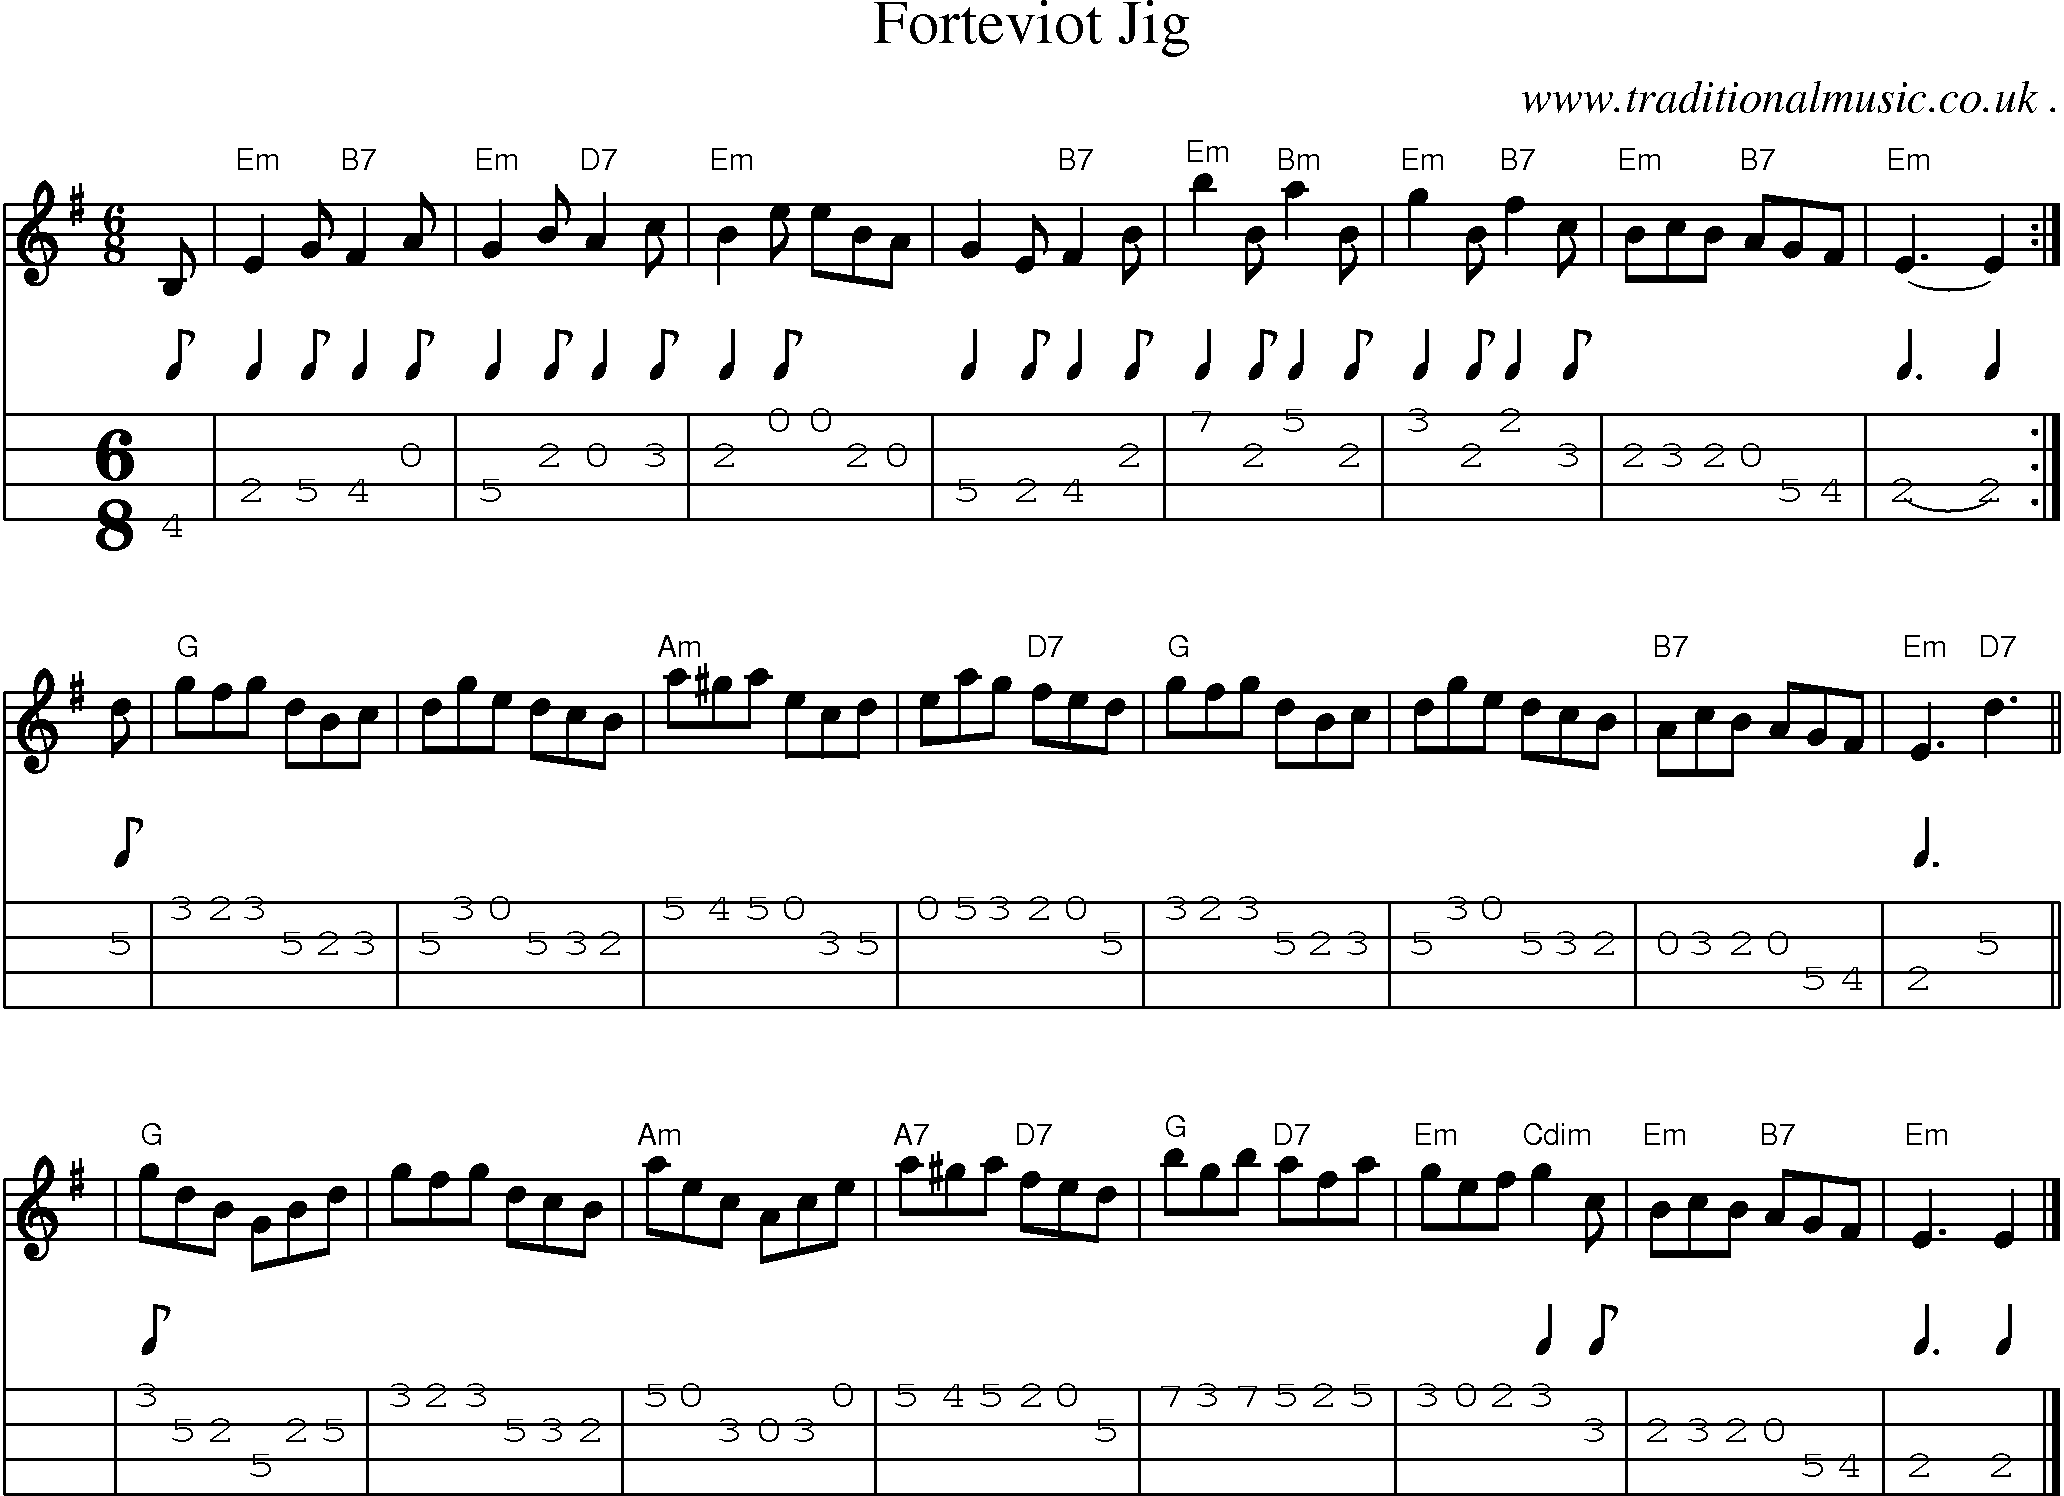 Sheet-music  score, Chords and Mandolin Tabs for Forteviot Jig